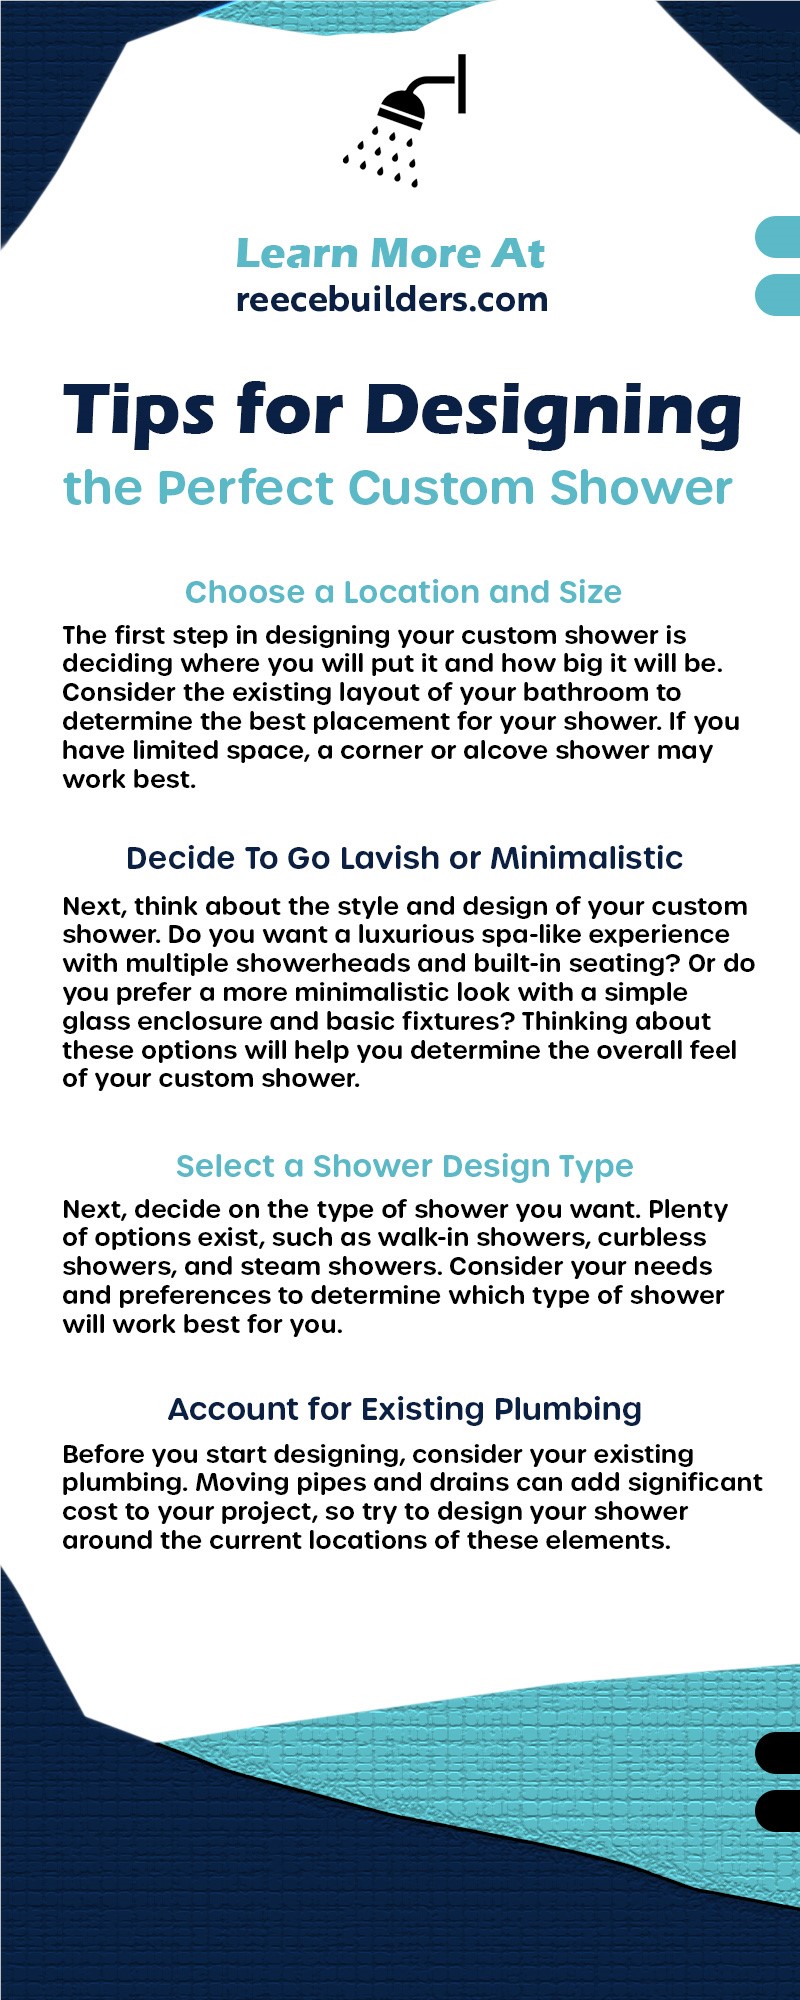 12 Tips for Designing the Perfect Custom Shower